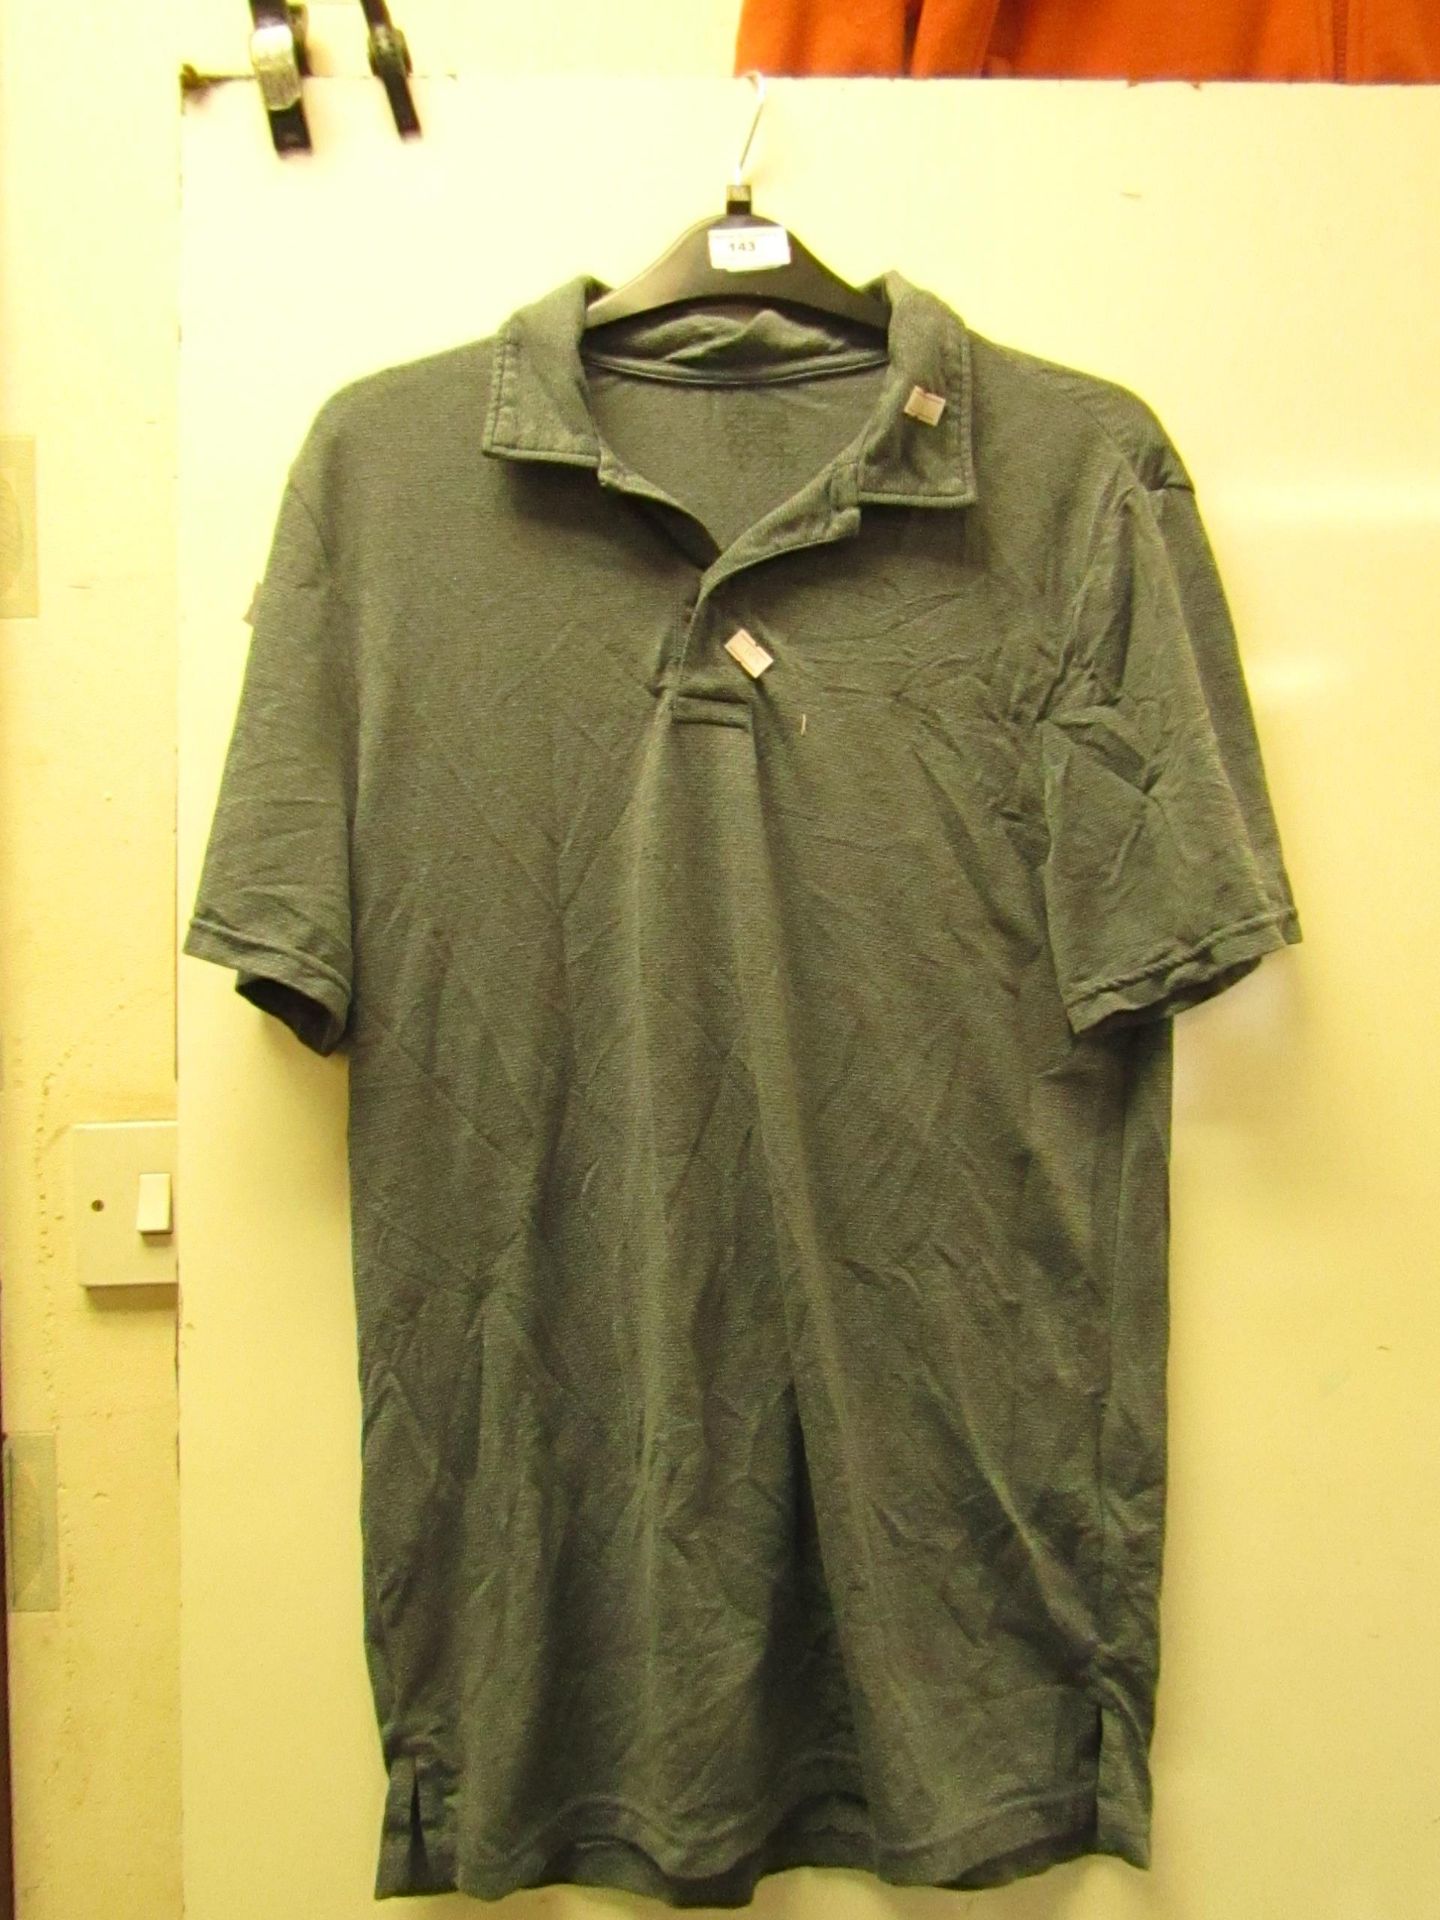 1 x 32 Degrees T/Shirt Size S Looks To Have Been Worn